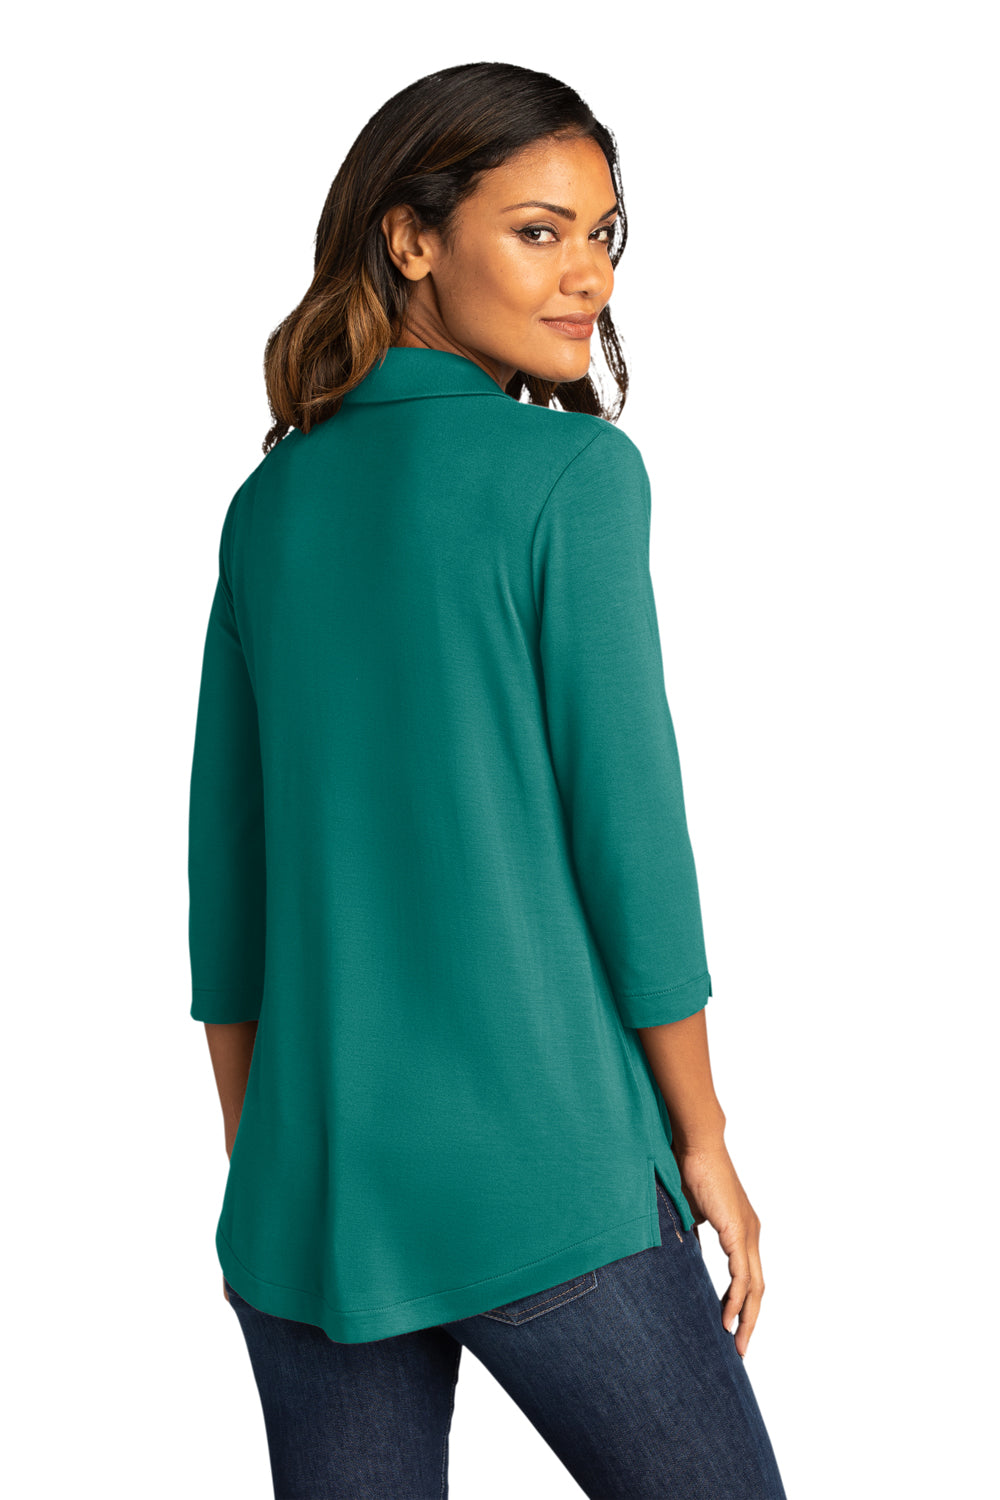 Port Authority Womens Luxe Knit 3/4 Sleeve Polo Shirt Teal Green Side